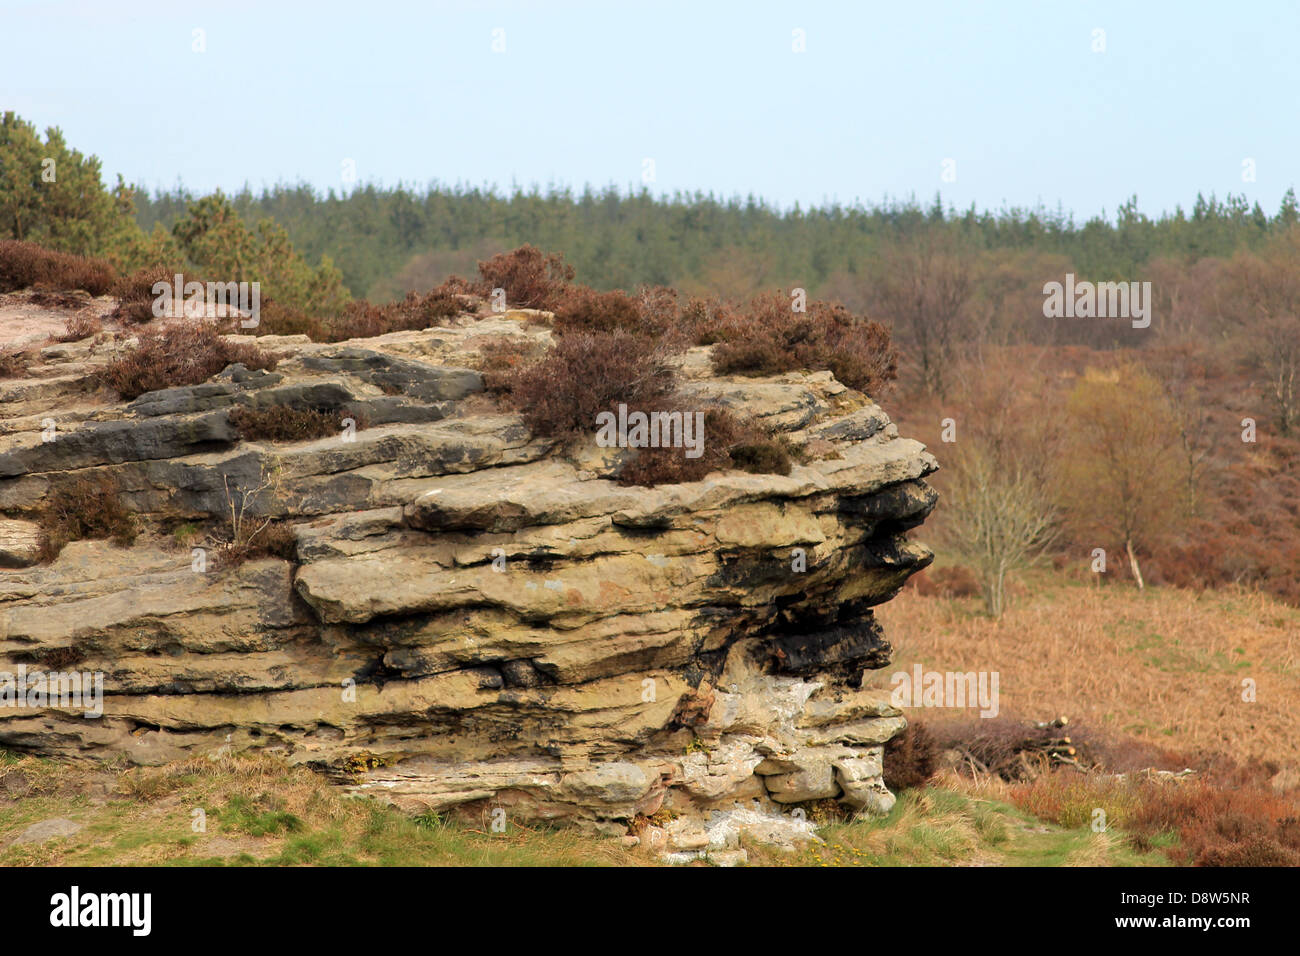 Eroded rock stack formation in countryside, North Yorkshire Moors National Park, England. Stock Photo